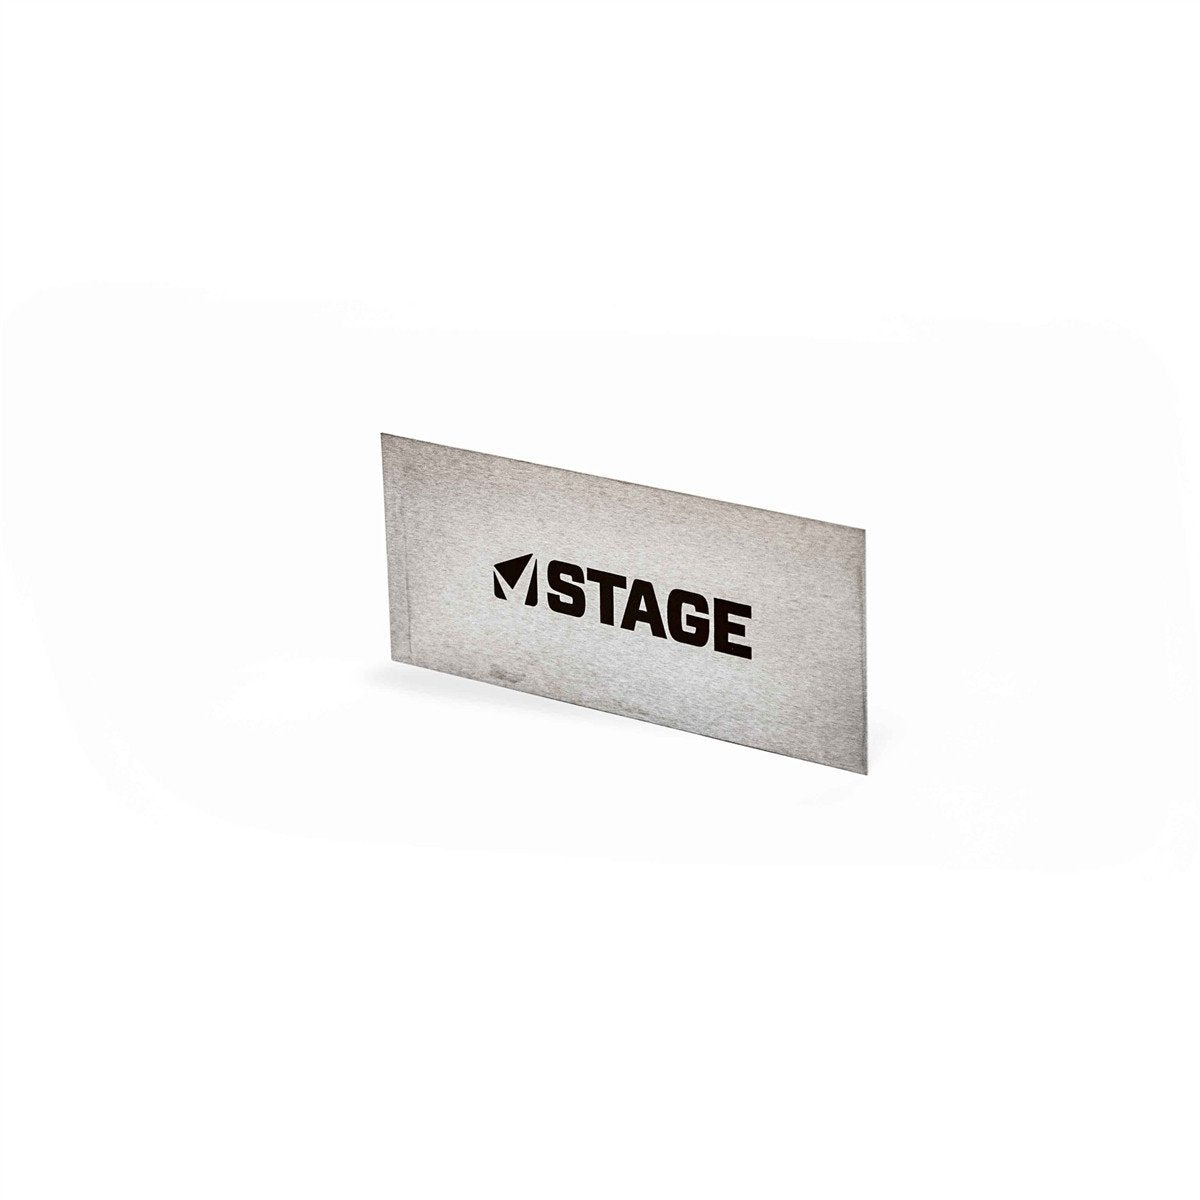 The STAGE Steel Scraper is perfect for removing P-Tex after base repairs and removing excess wax from plastic scrapers. An essential tool for any base repair job.